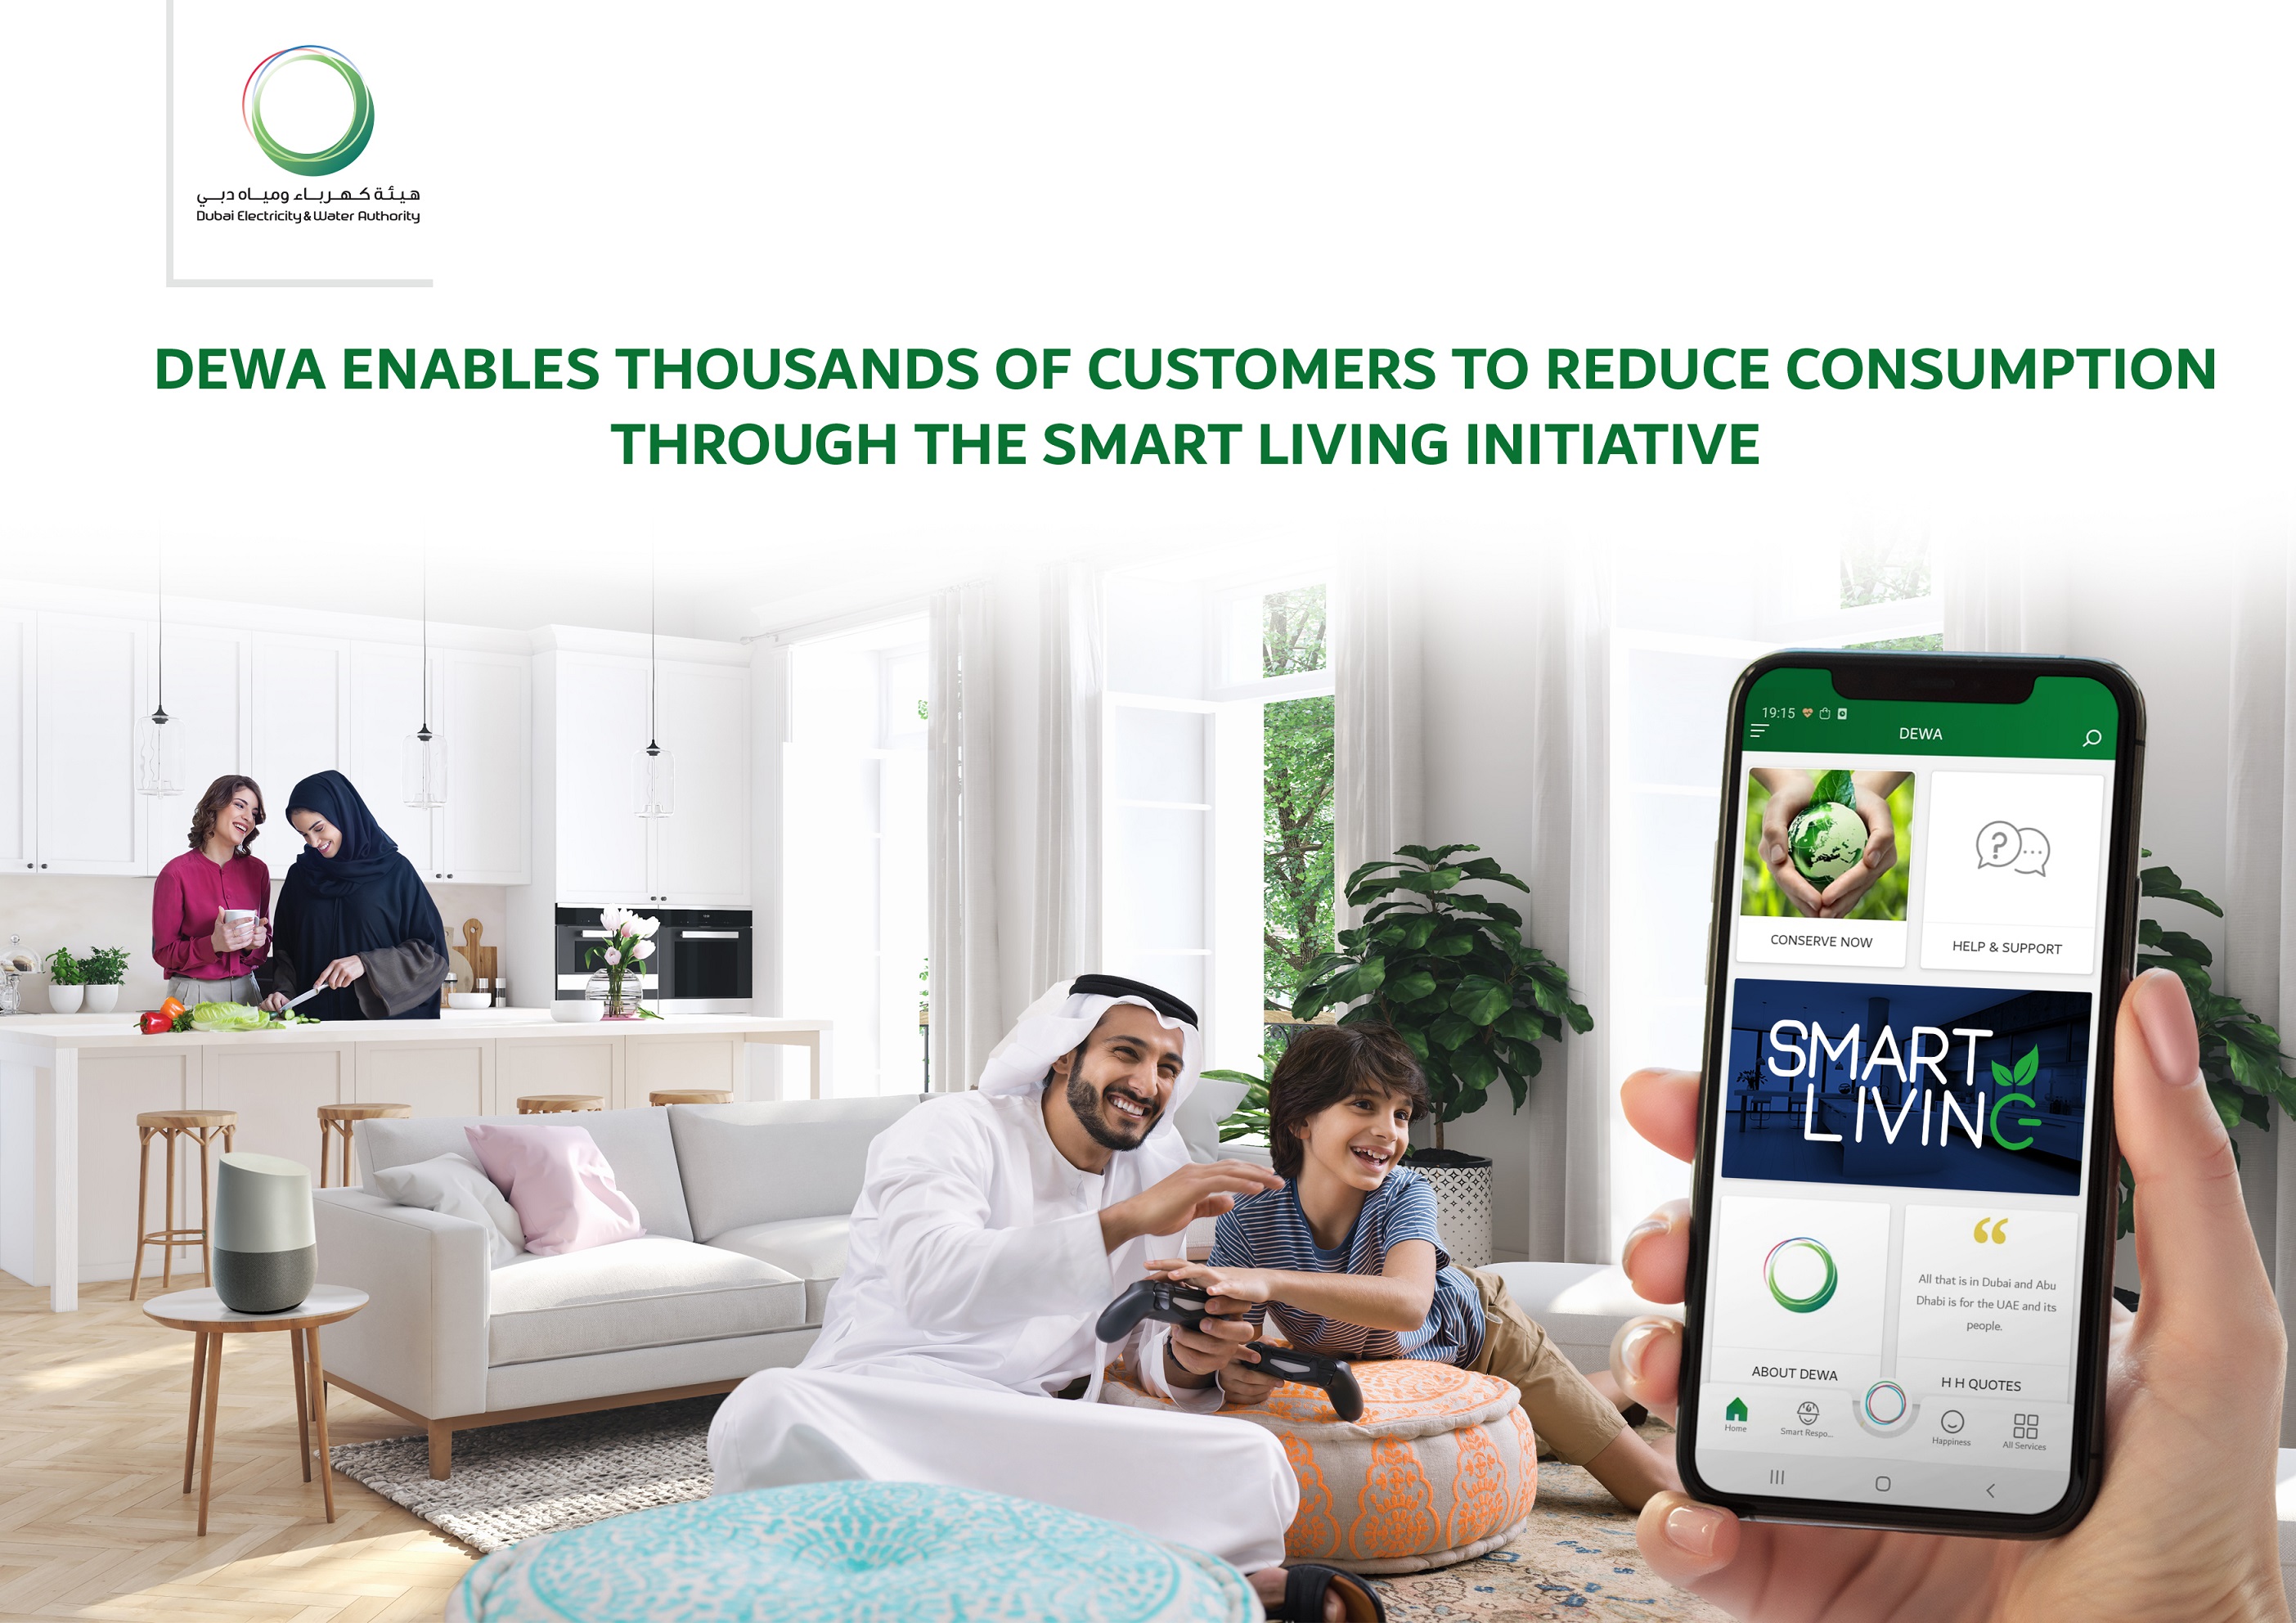 DEWA enables thousands of customers to reduce consumption through the Smart Living initiative